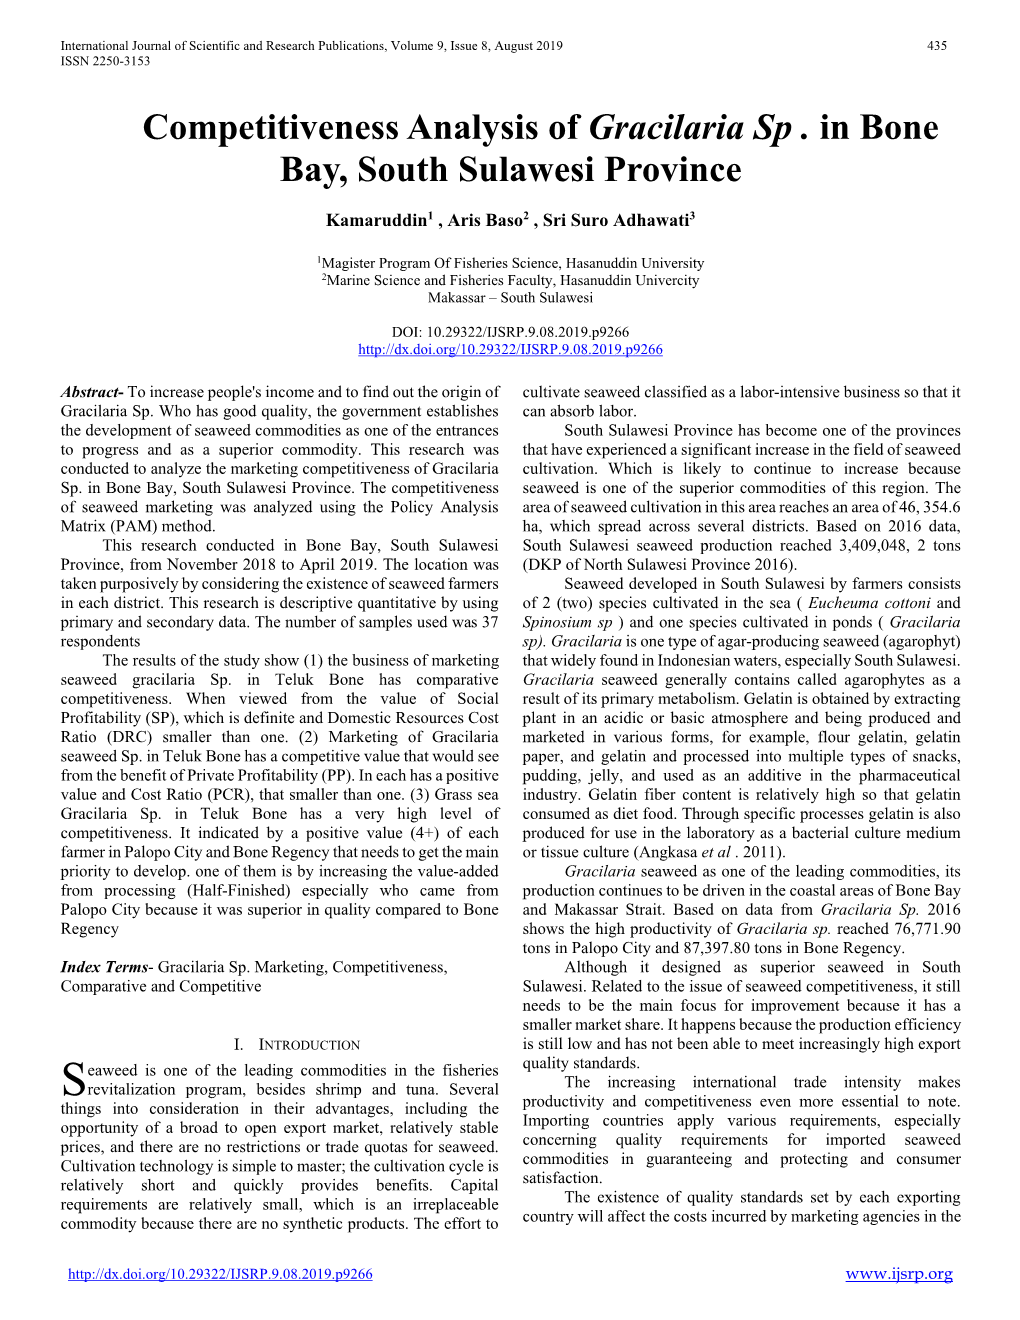 Competitiveness Analysis of Gracilaria Sp . in Bone Bay, South Sulawesi Province